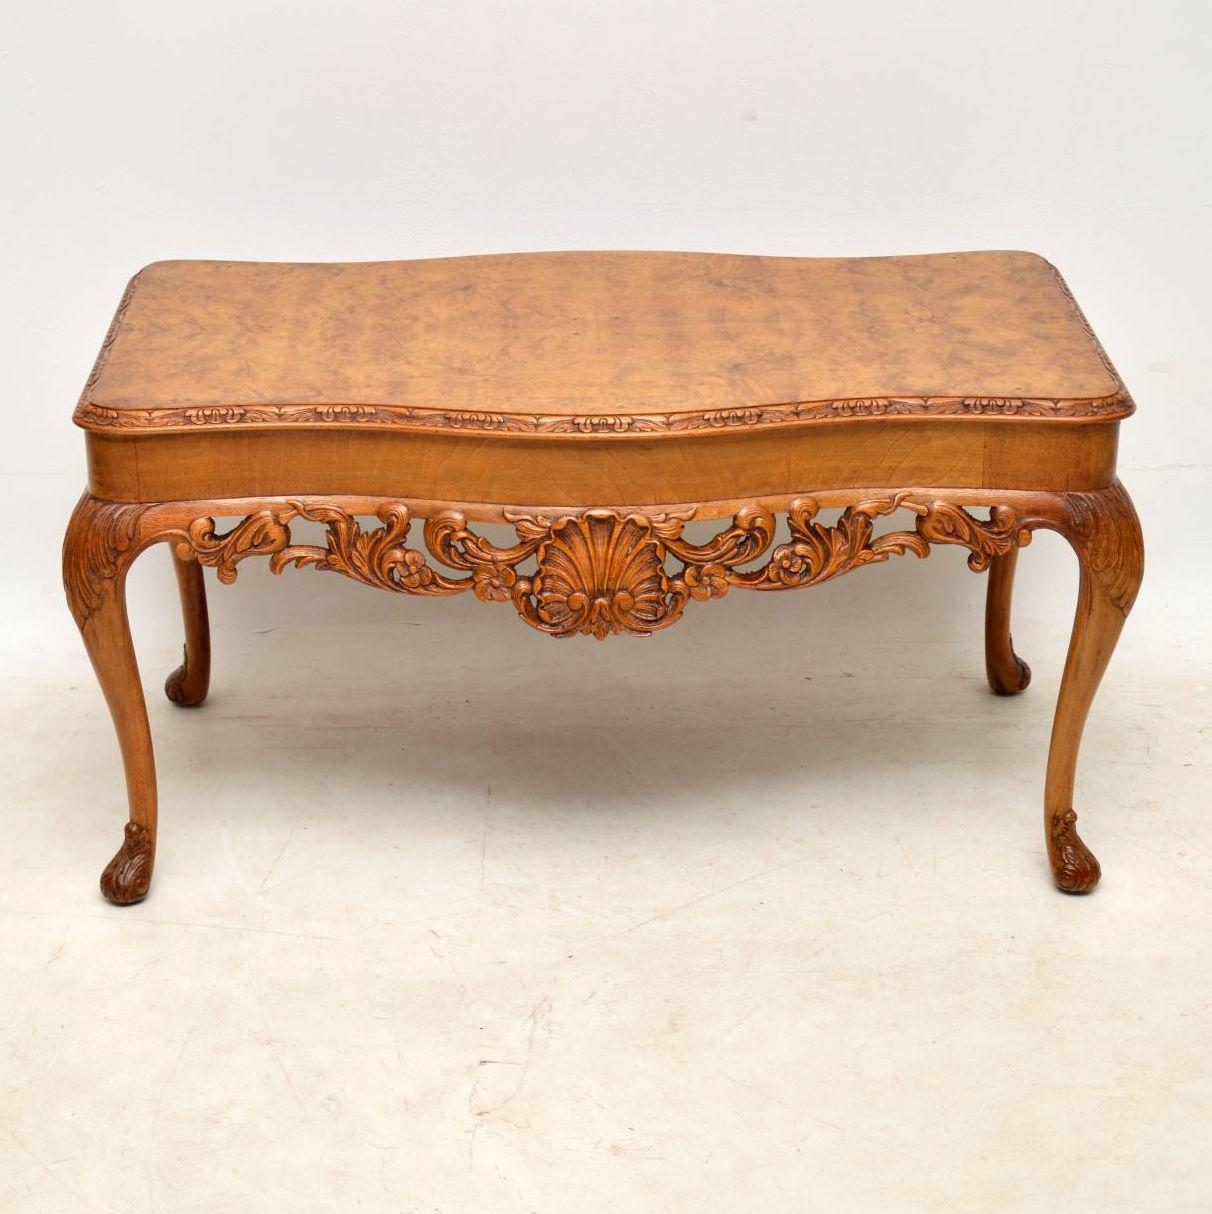 This antique walnut coffee table has a wonderful mellow color and is full of character. It is beautifully carved all over and the deep carvings between the legs are stunning. This coffee table is in good condition all over and dates from around the